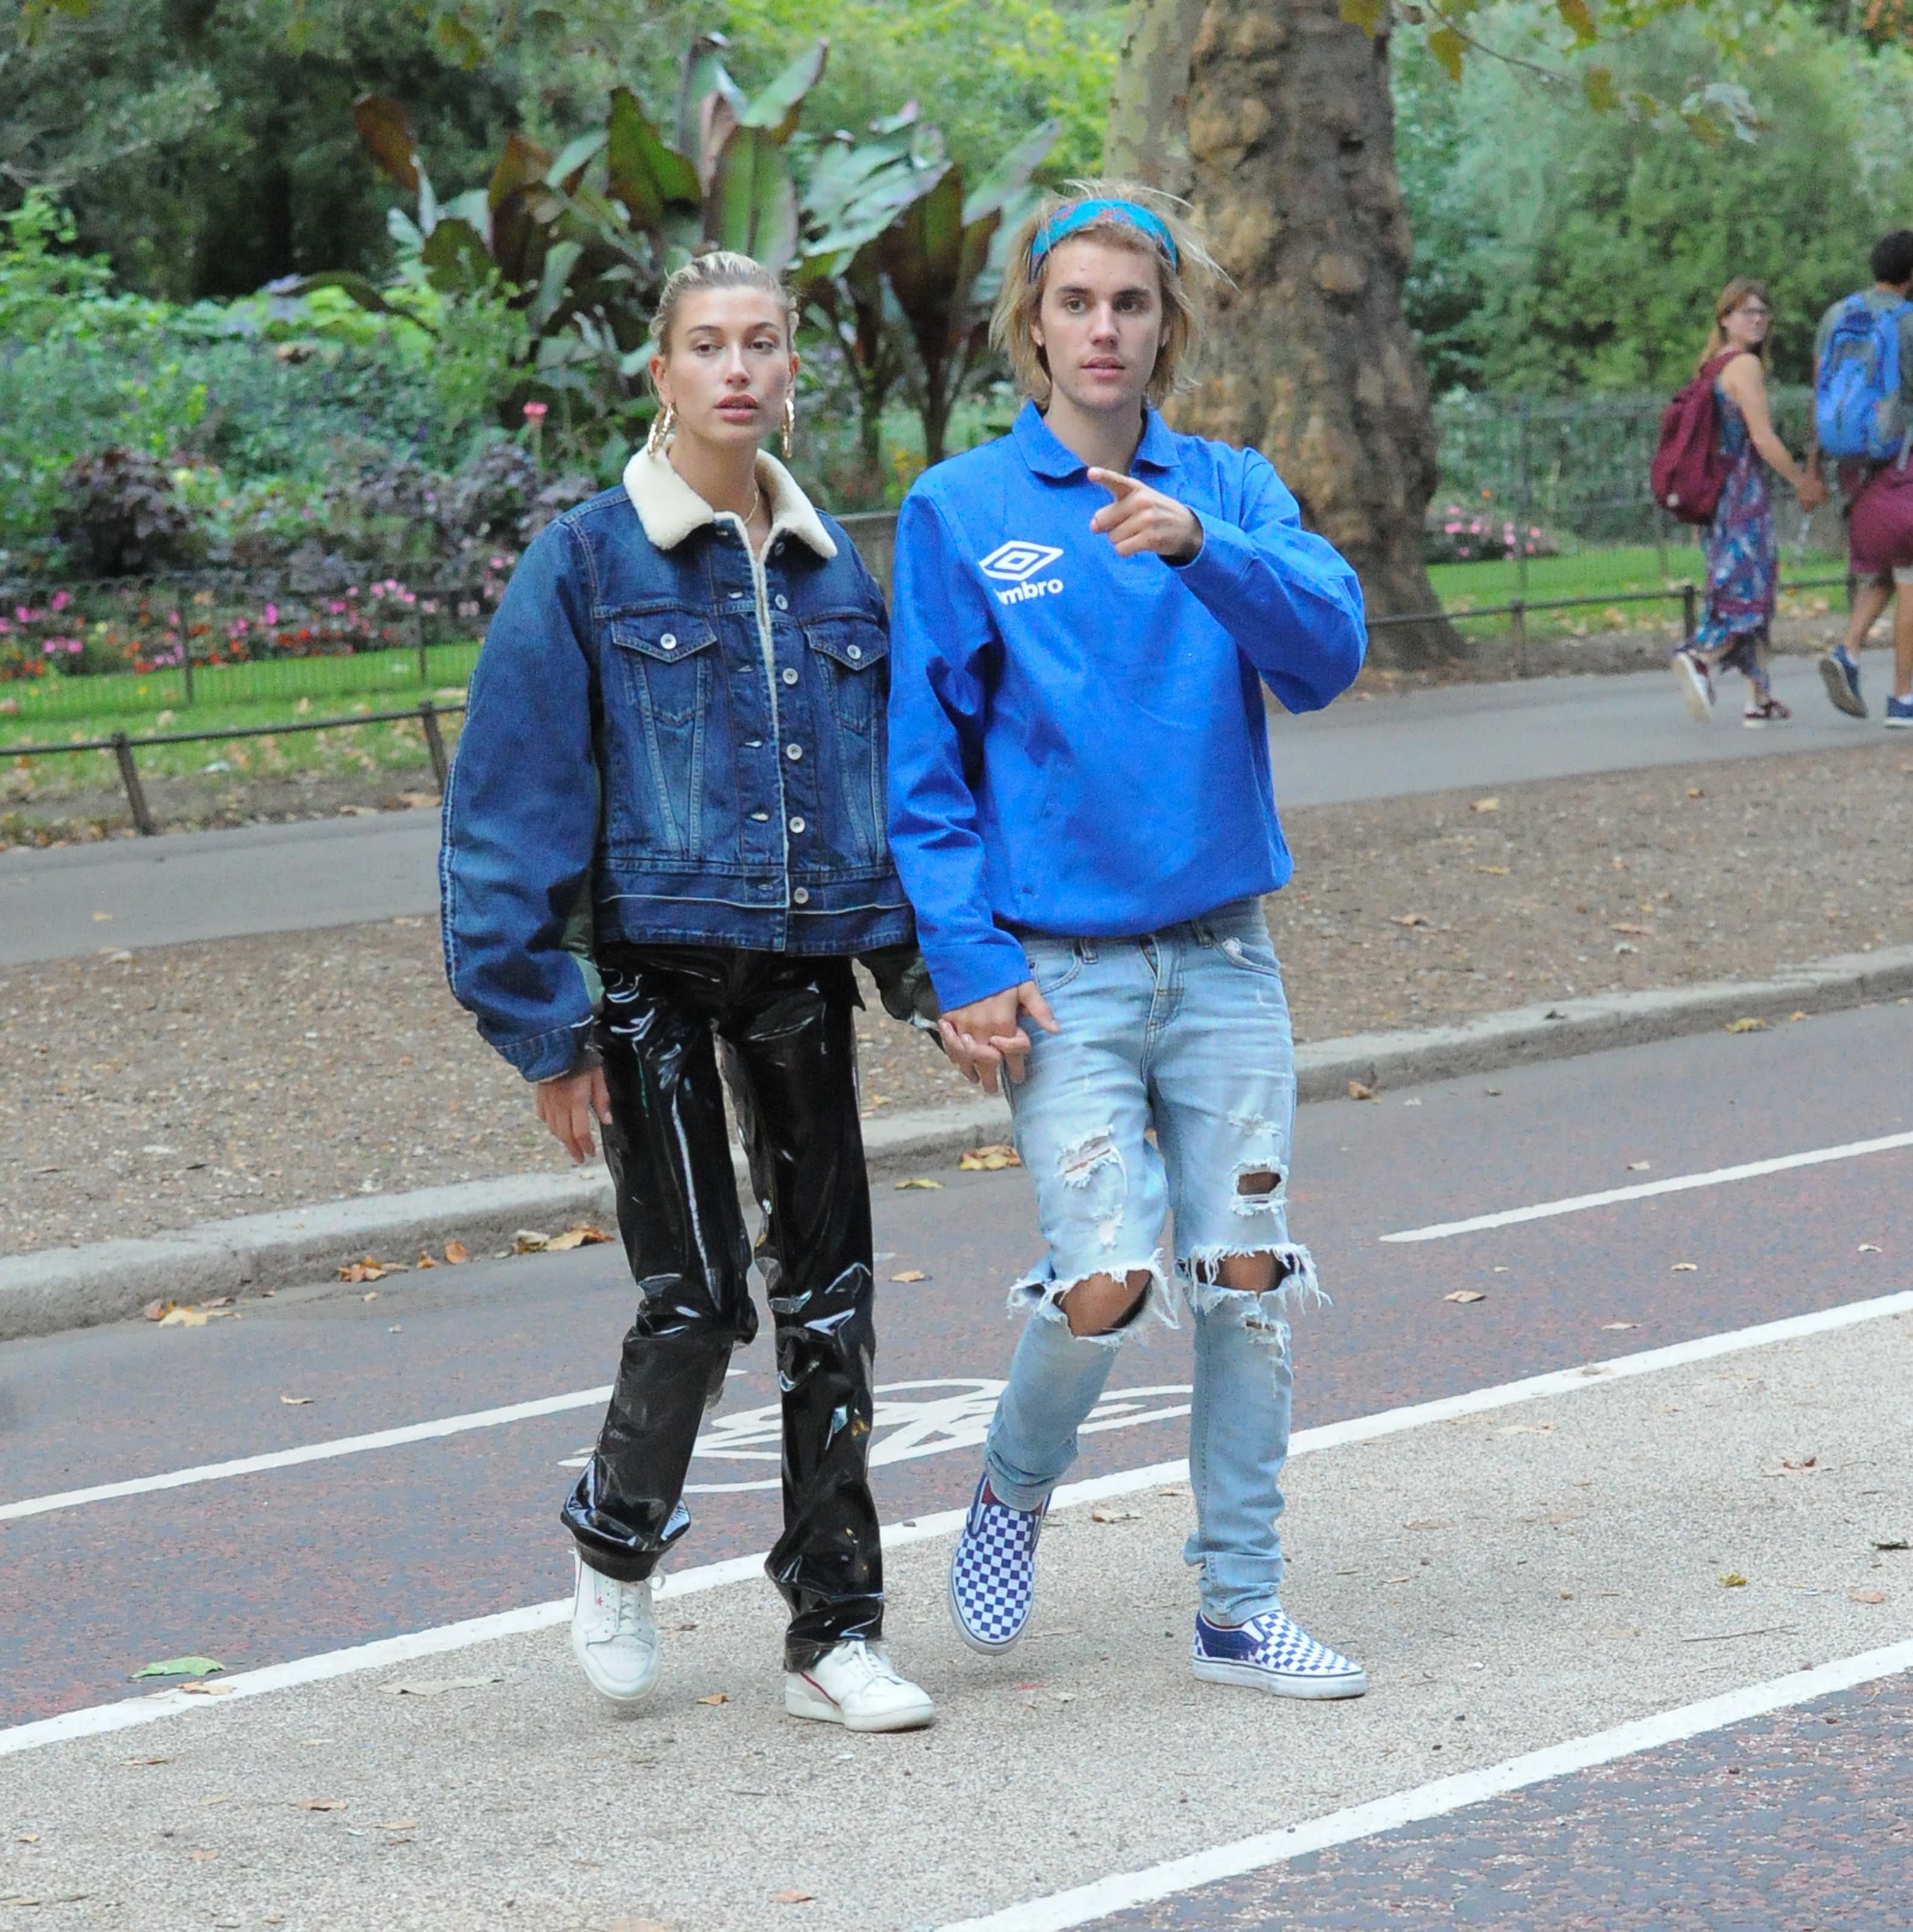 Hailey Baldwin and Justin Bieber out and about